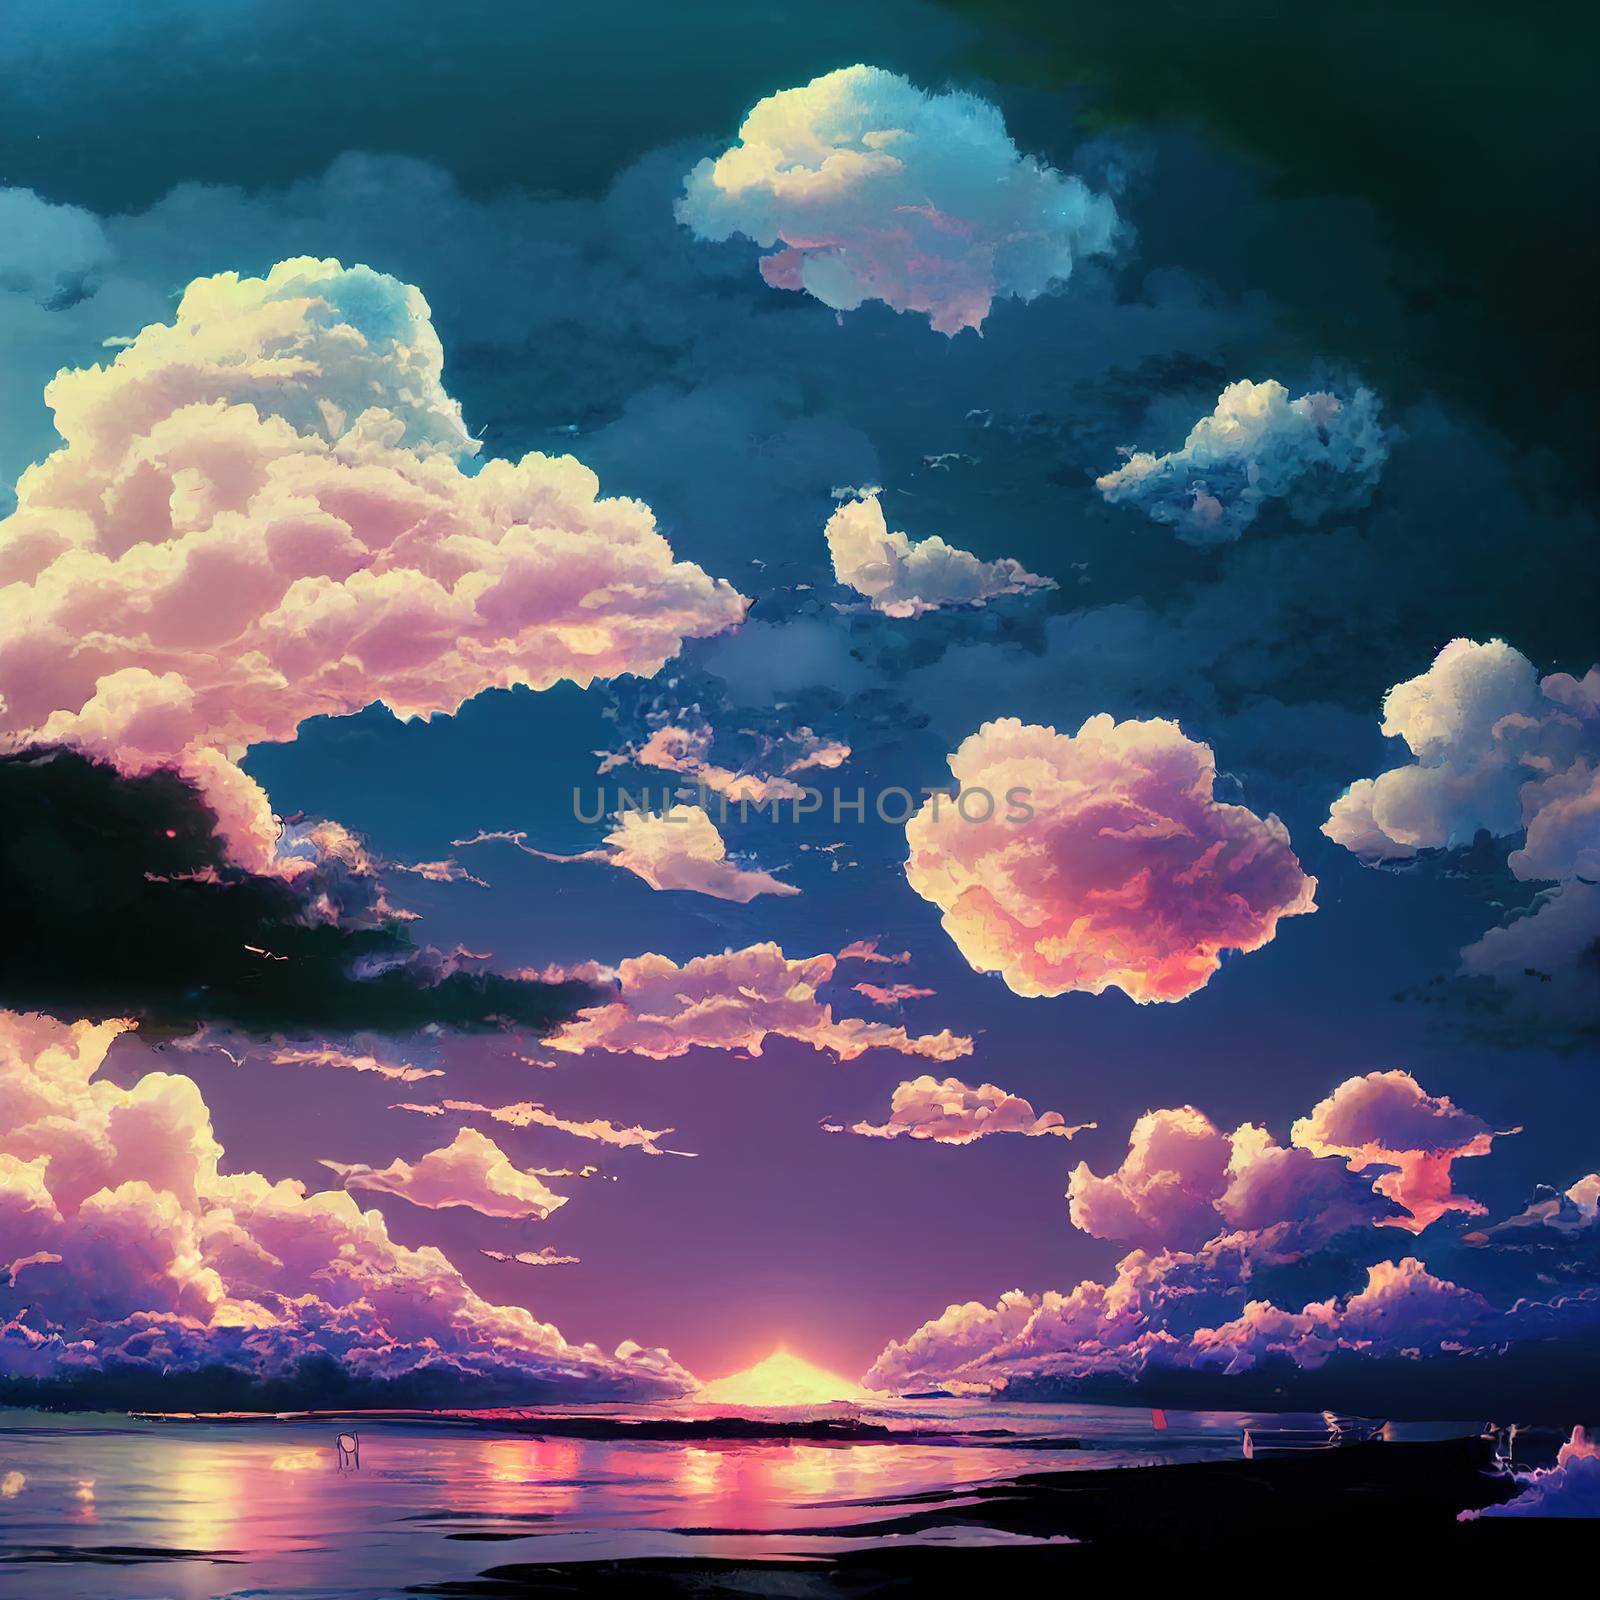 anime evening clouds 3. High quality 3d illustration